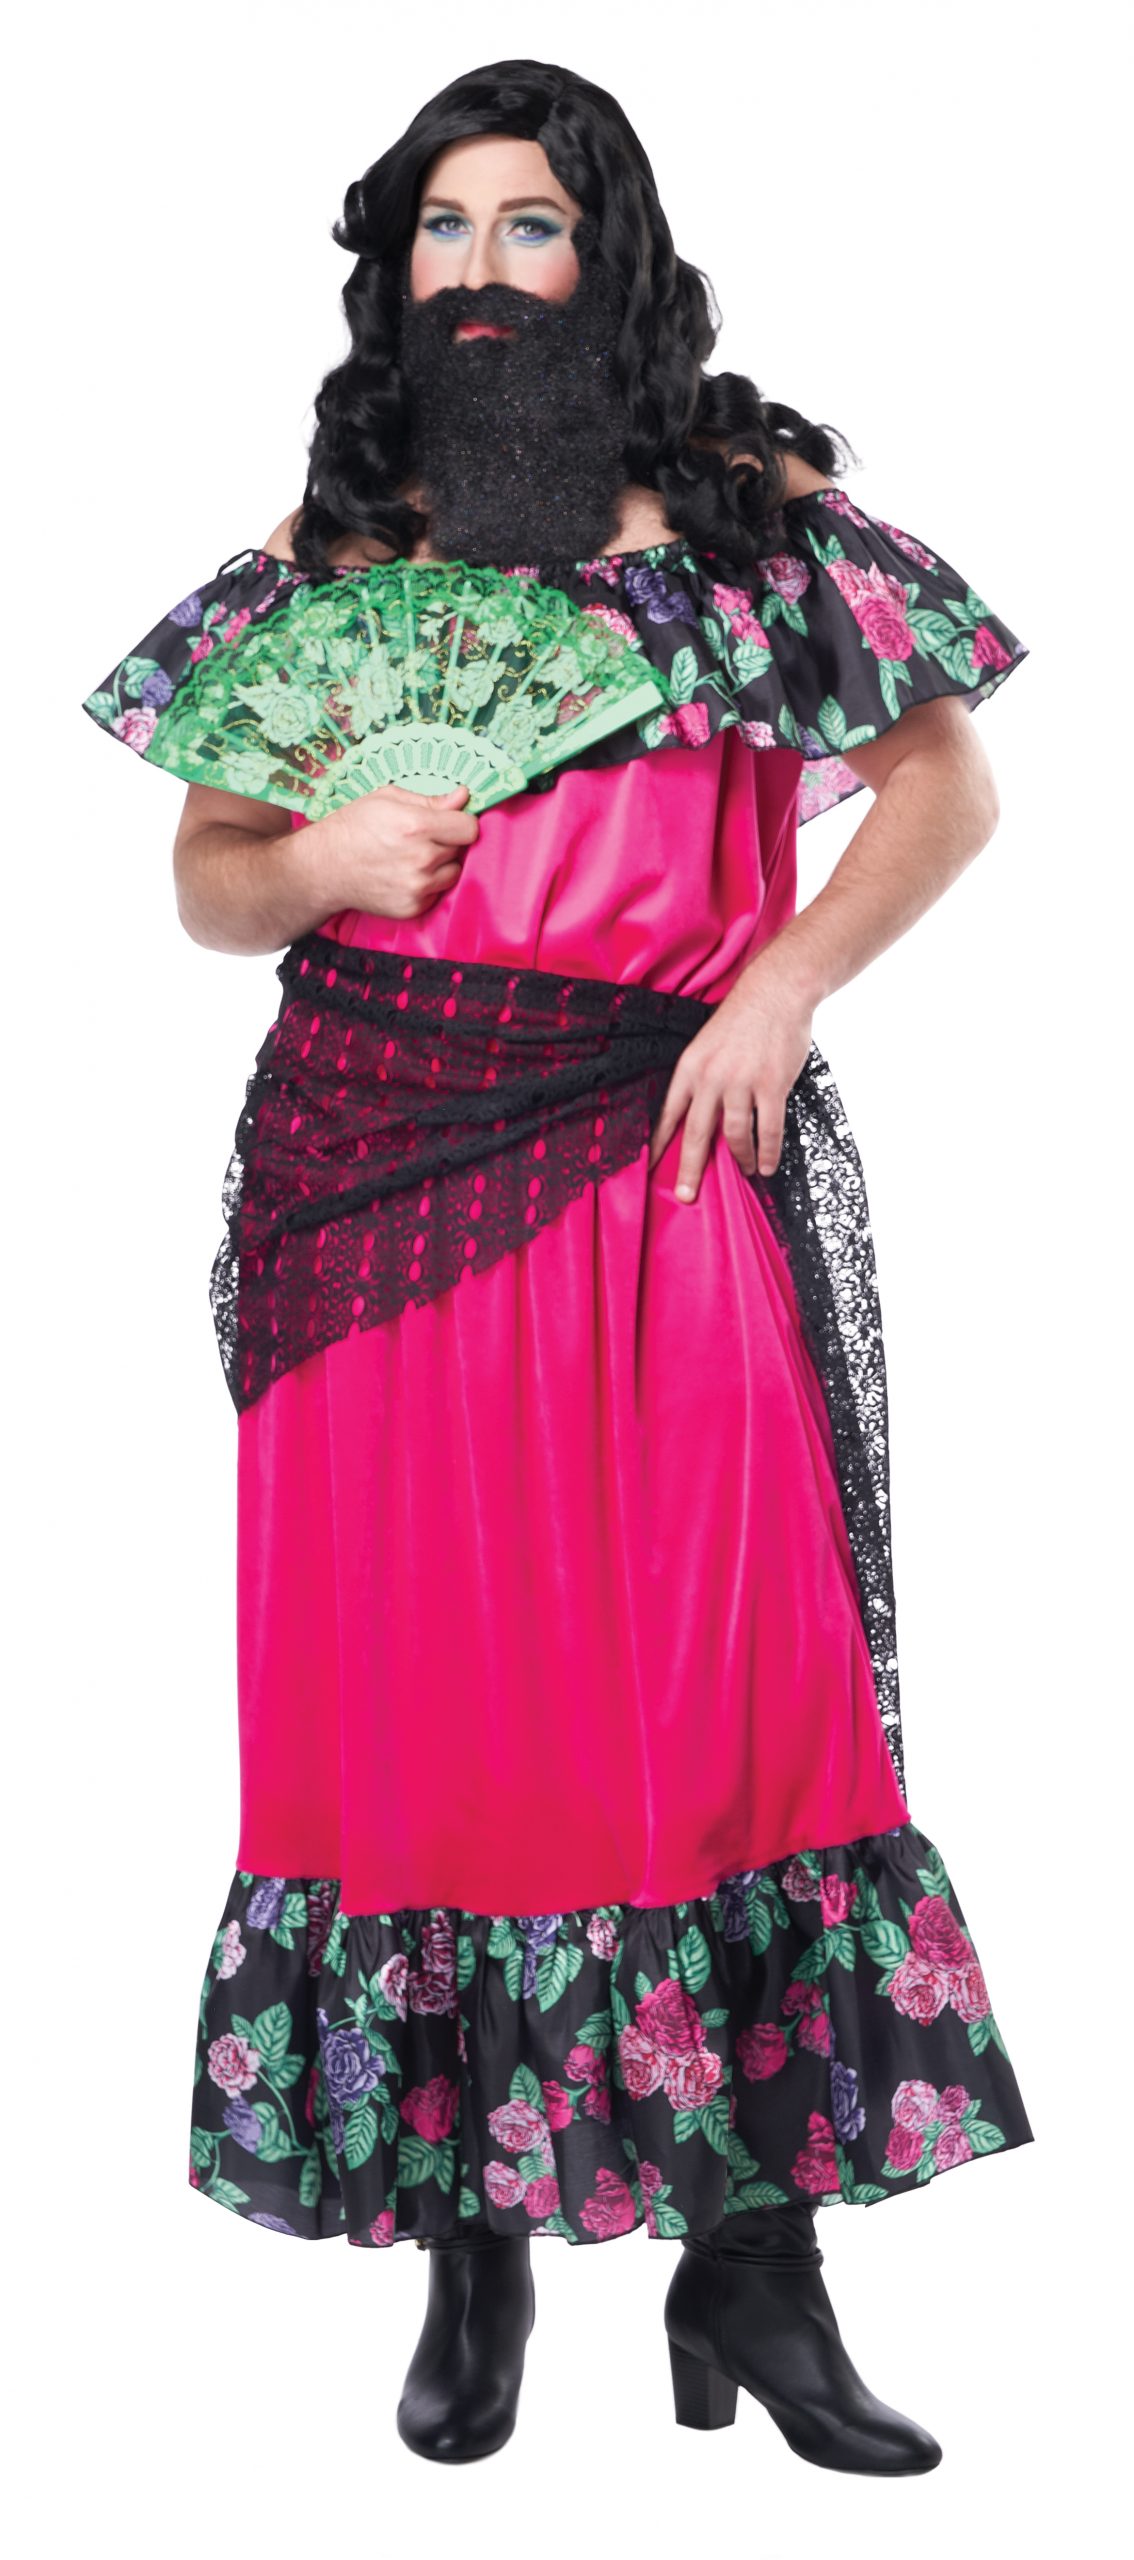 The Bearded Lady Adult Costume